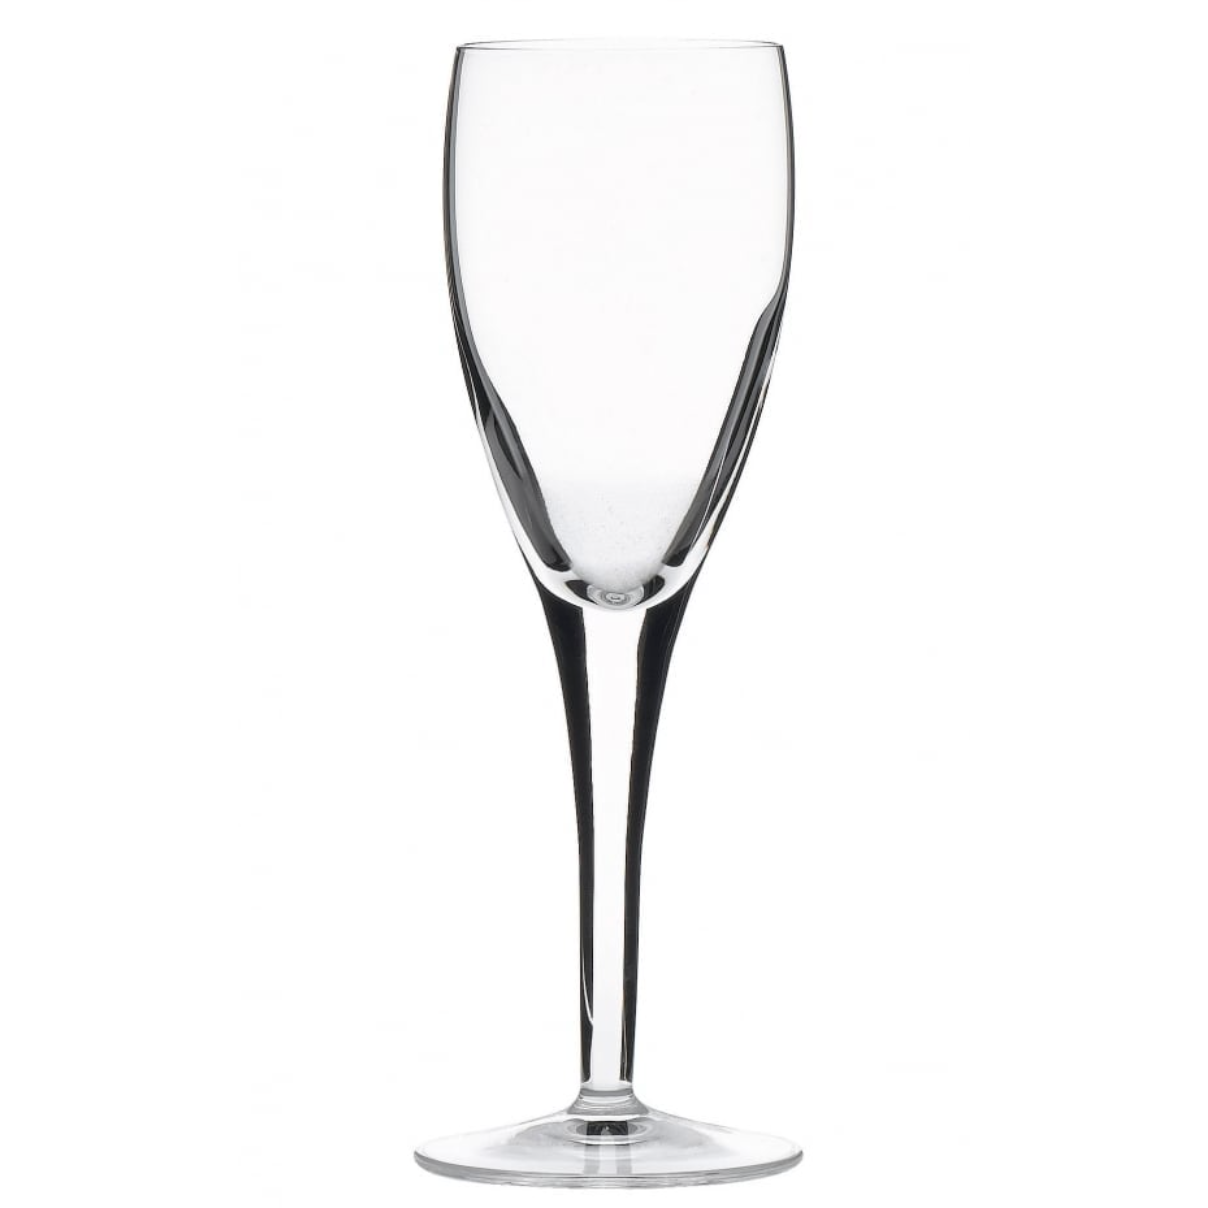 Michelangelo Crystal Champagne Flute Glass 160ml 